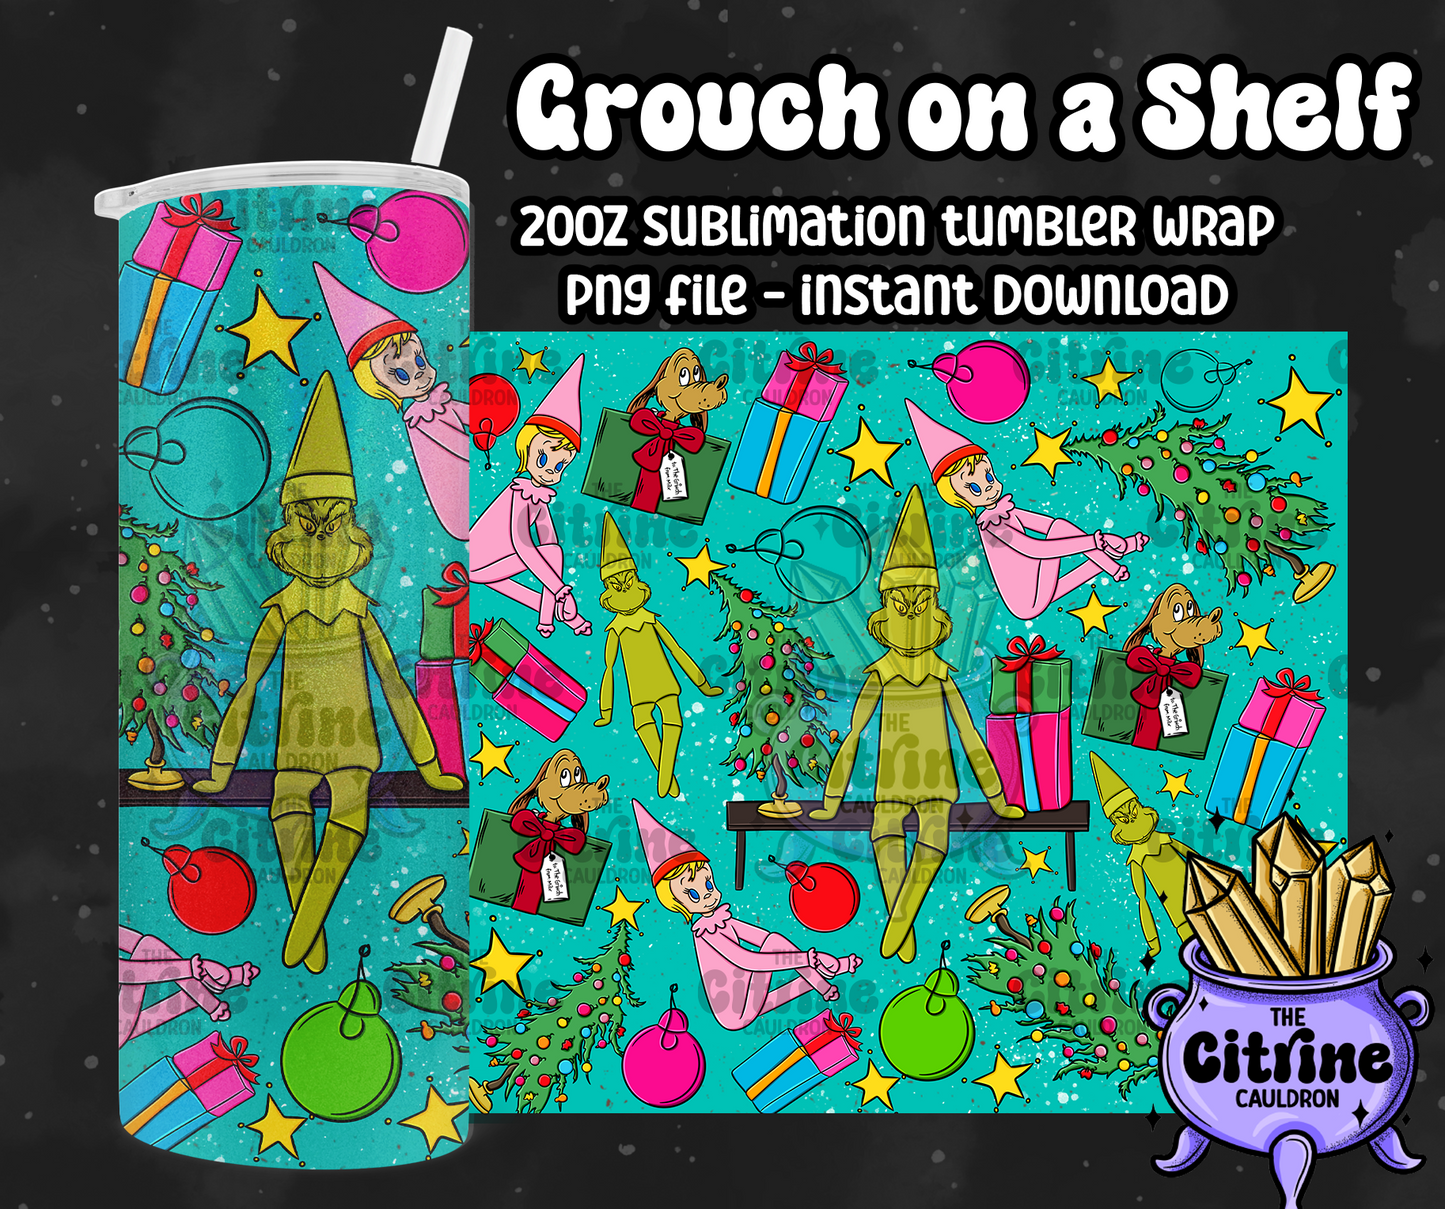 Grouch on a Shelf - PNG Wrap for Sublimation 20oz Tumbler